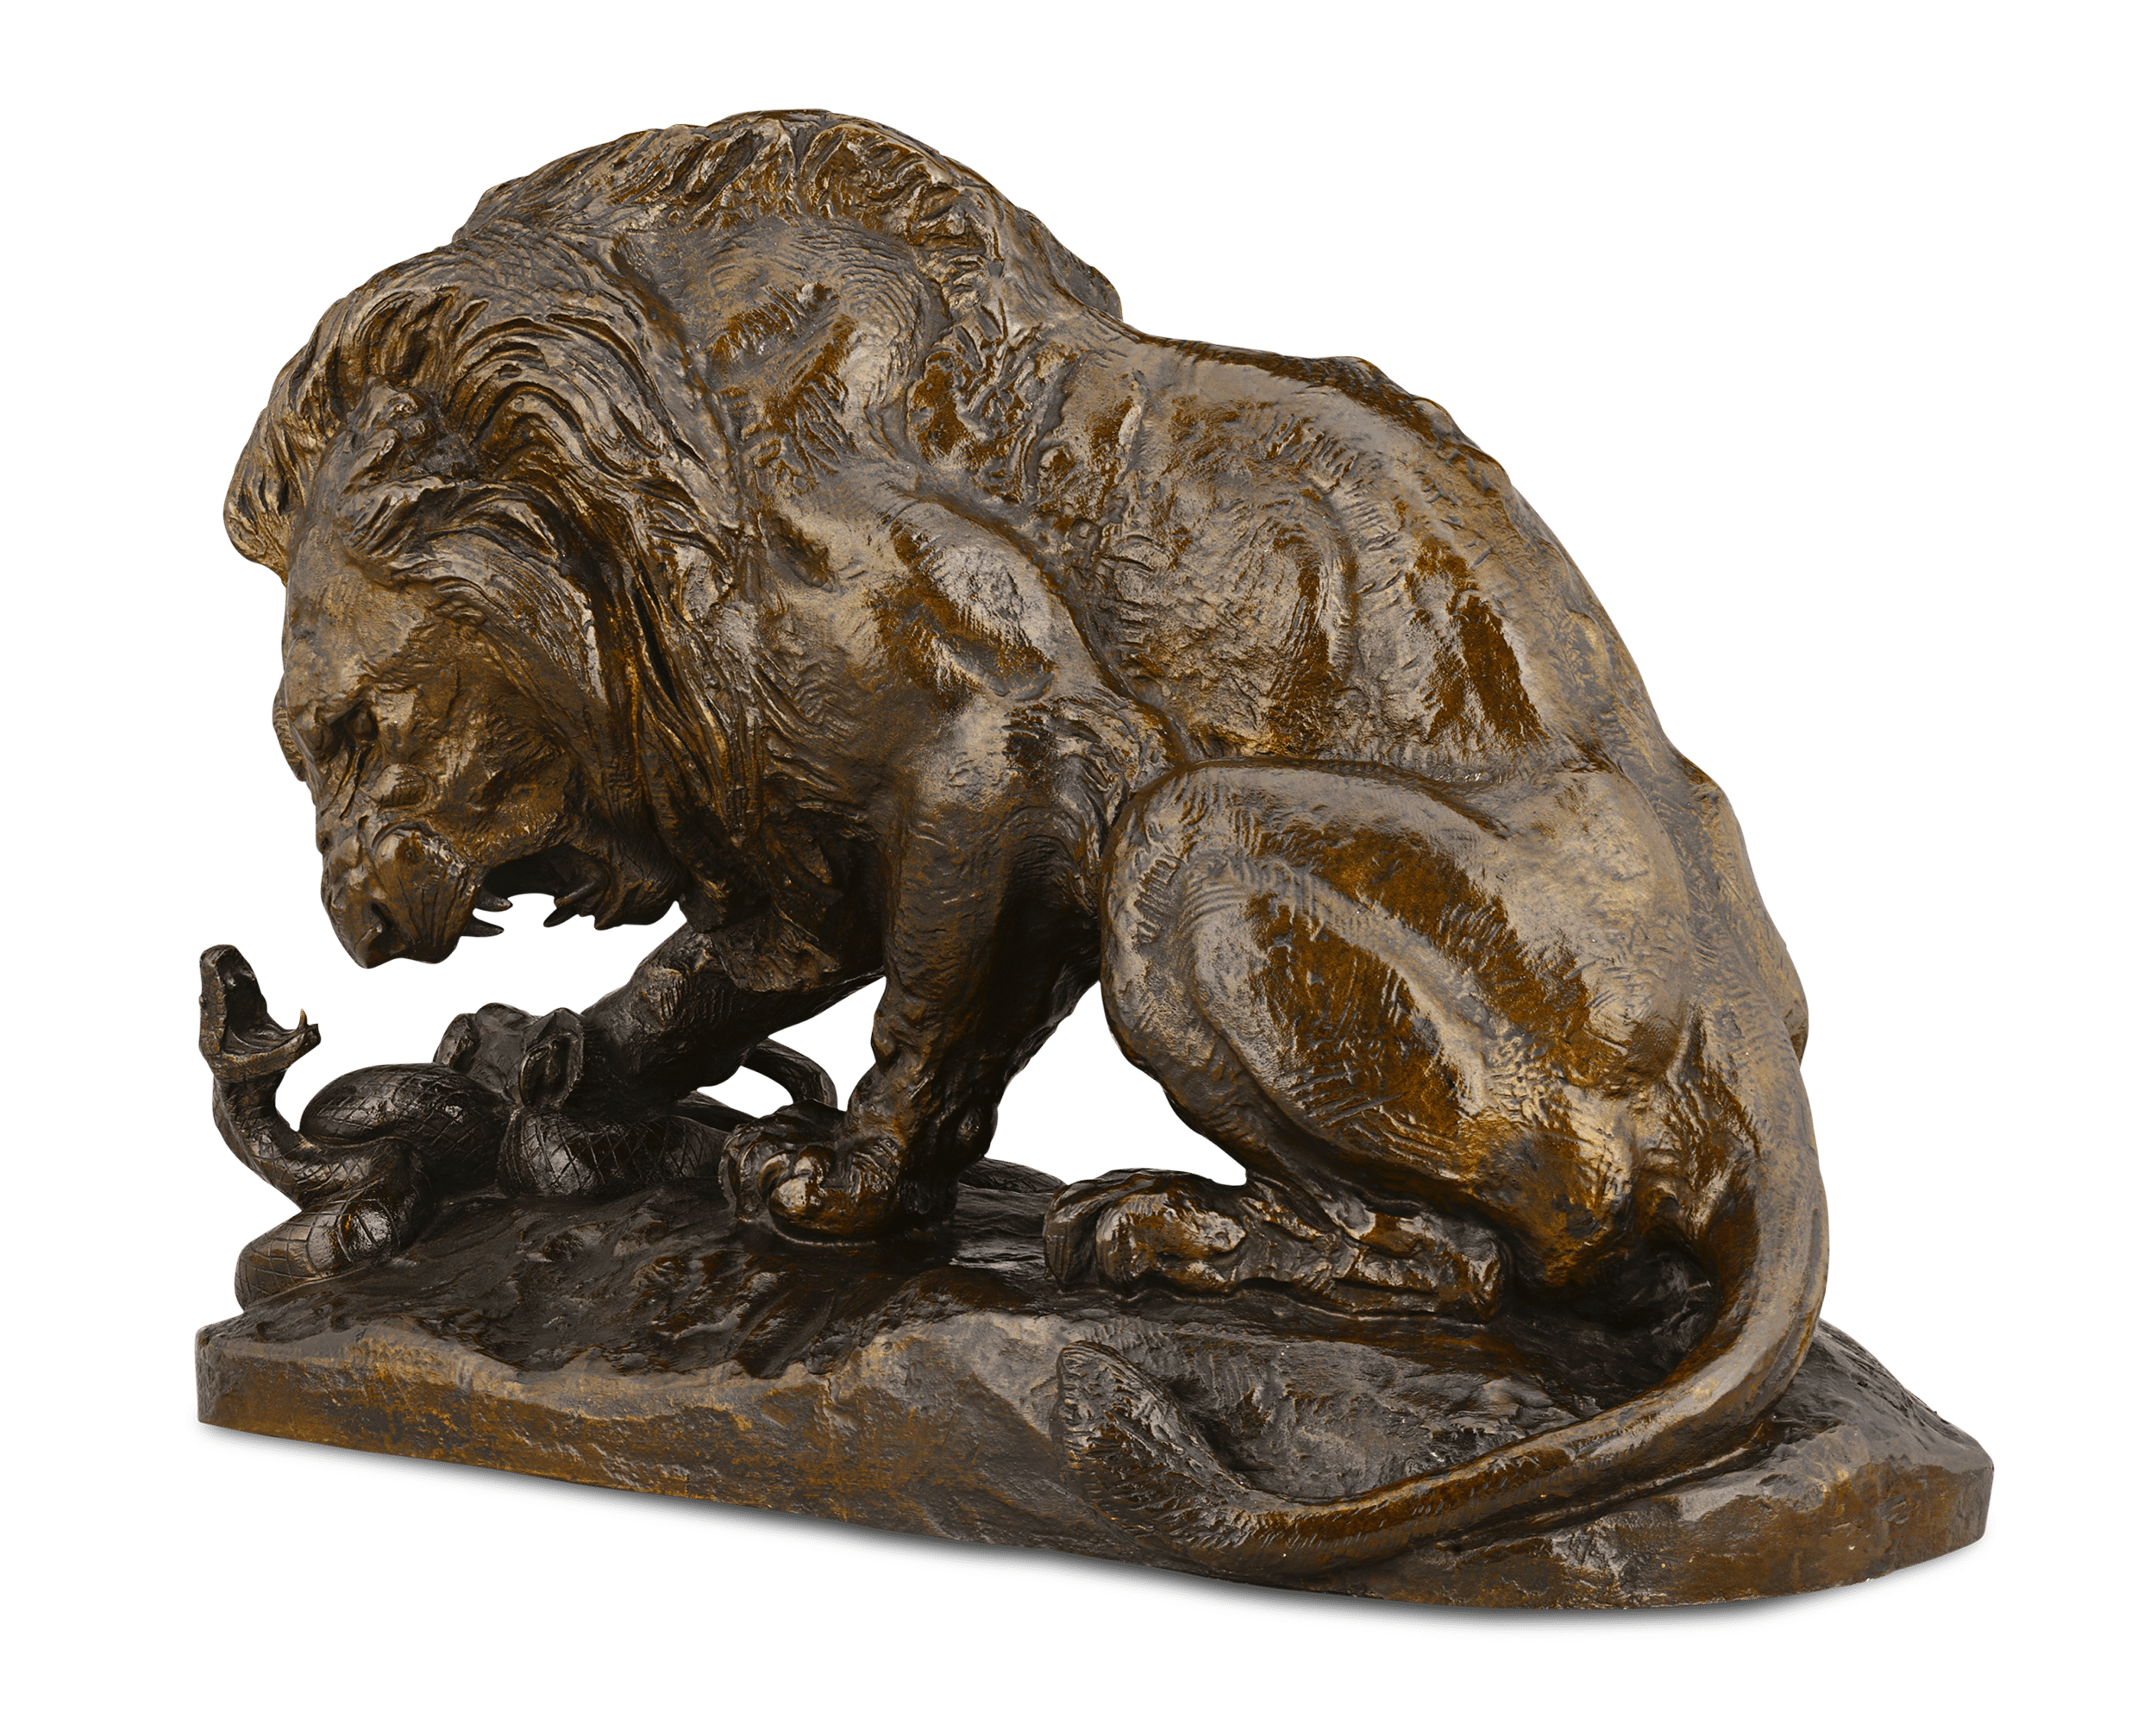 Lion and Serpent by Antoine-Louis Barye